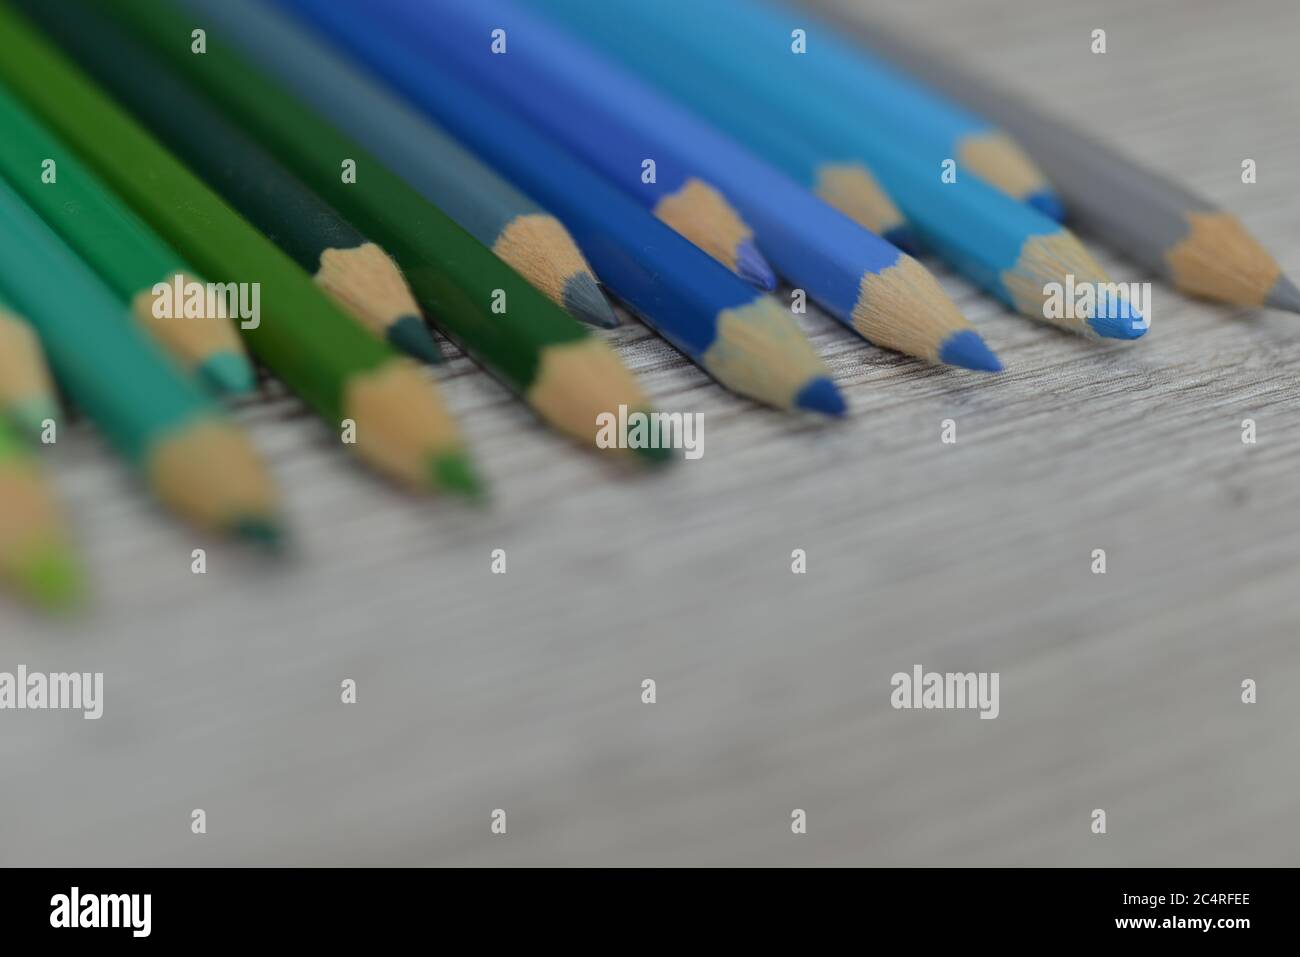 Rainbow Colored Pencils Lined Up on White Background Photograph by Ocean  Breeze - Pixels